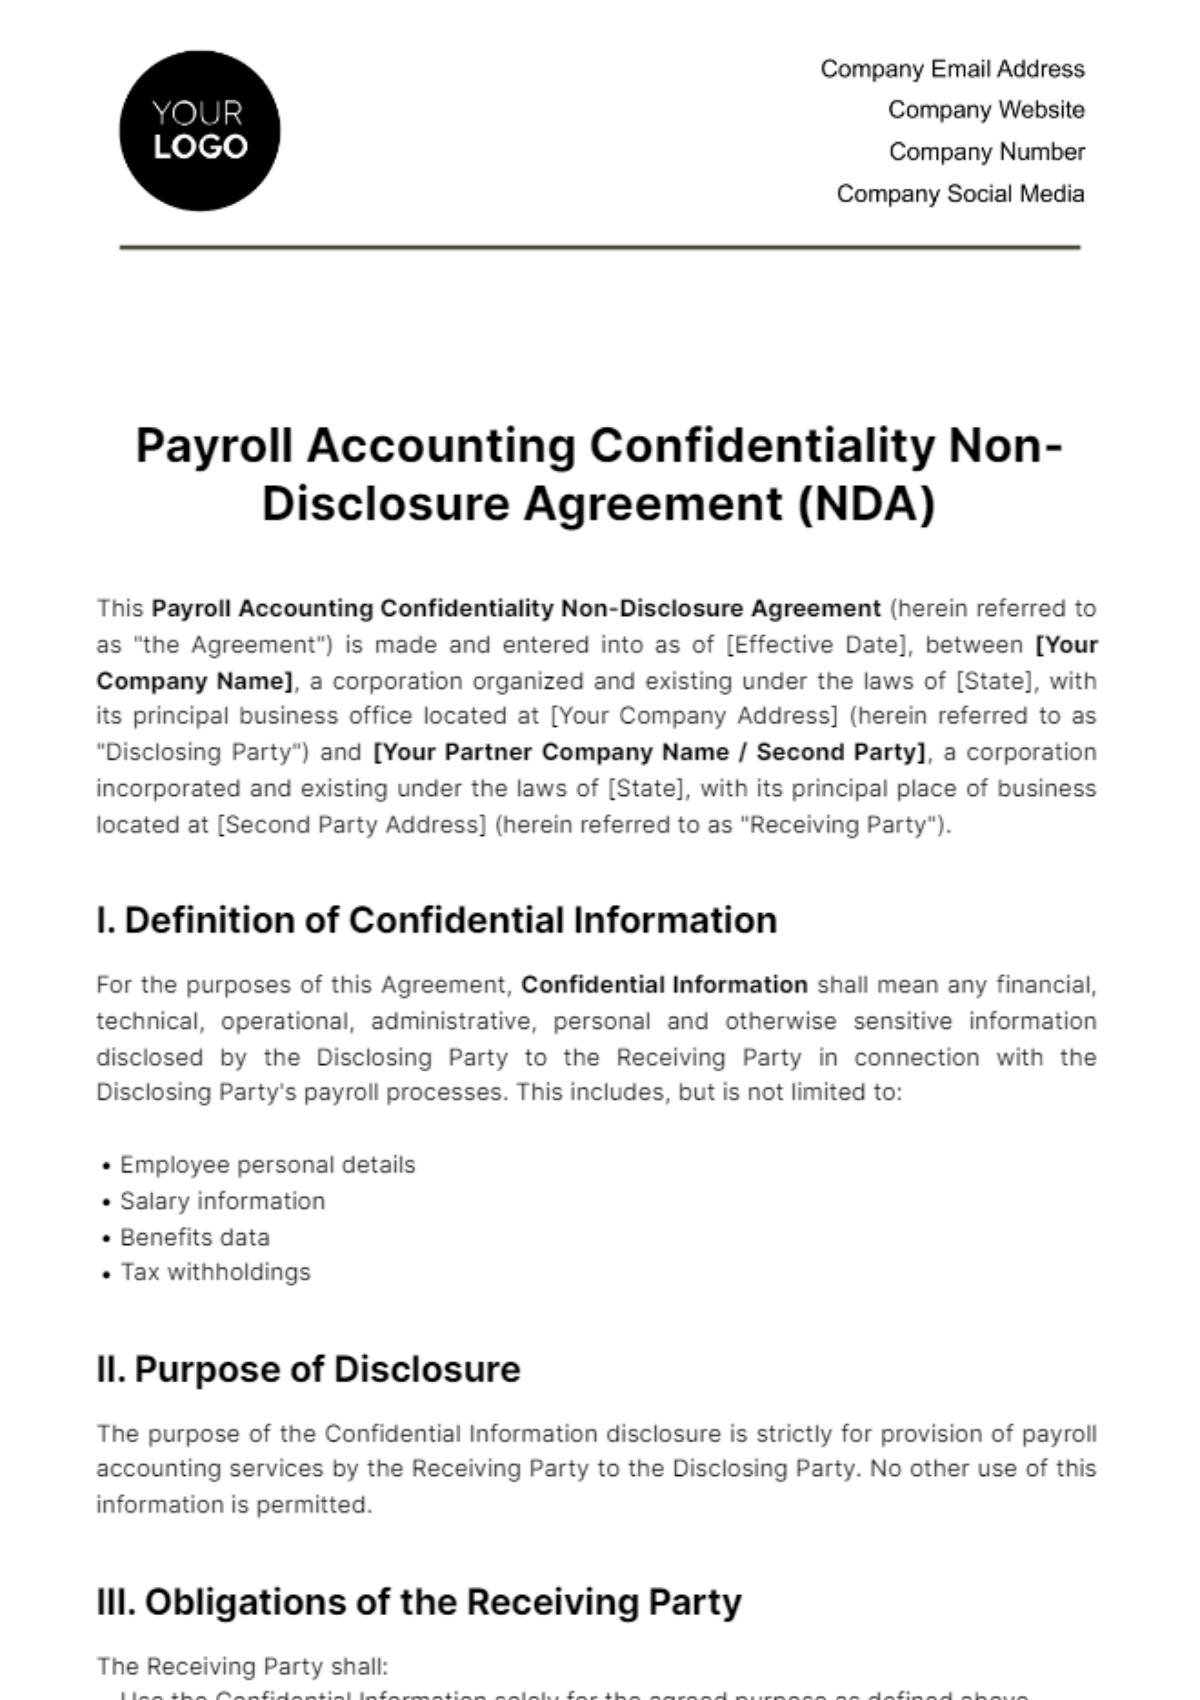 Free Payroll Accounting Confidentiality NDA Template